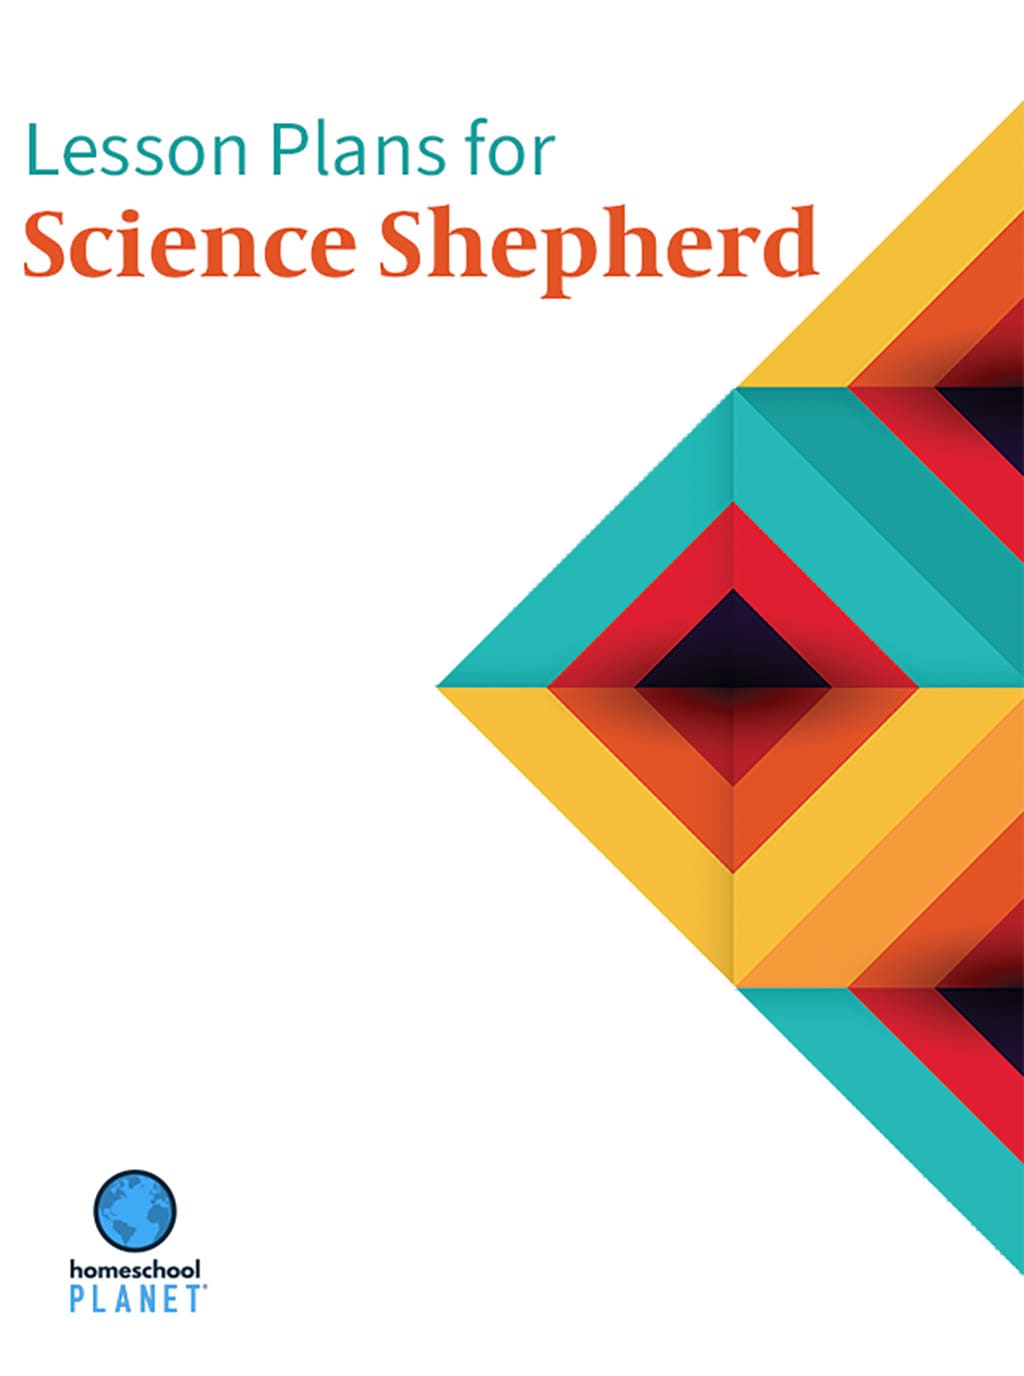 Cover image for the Science Shepherd homeschool chemistry lesson plan from Homeschool Planet